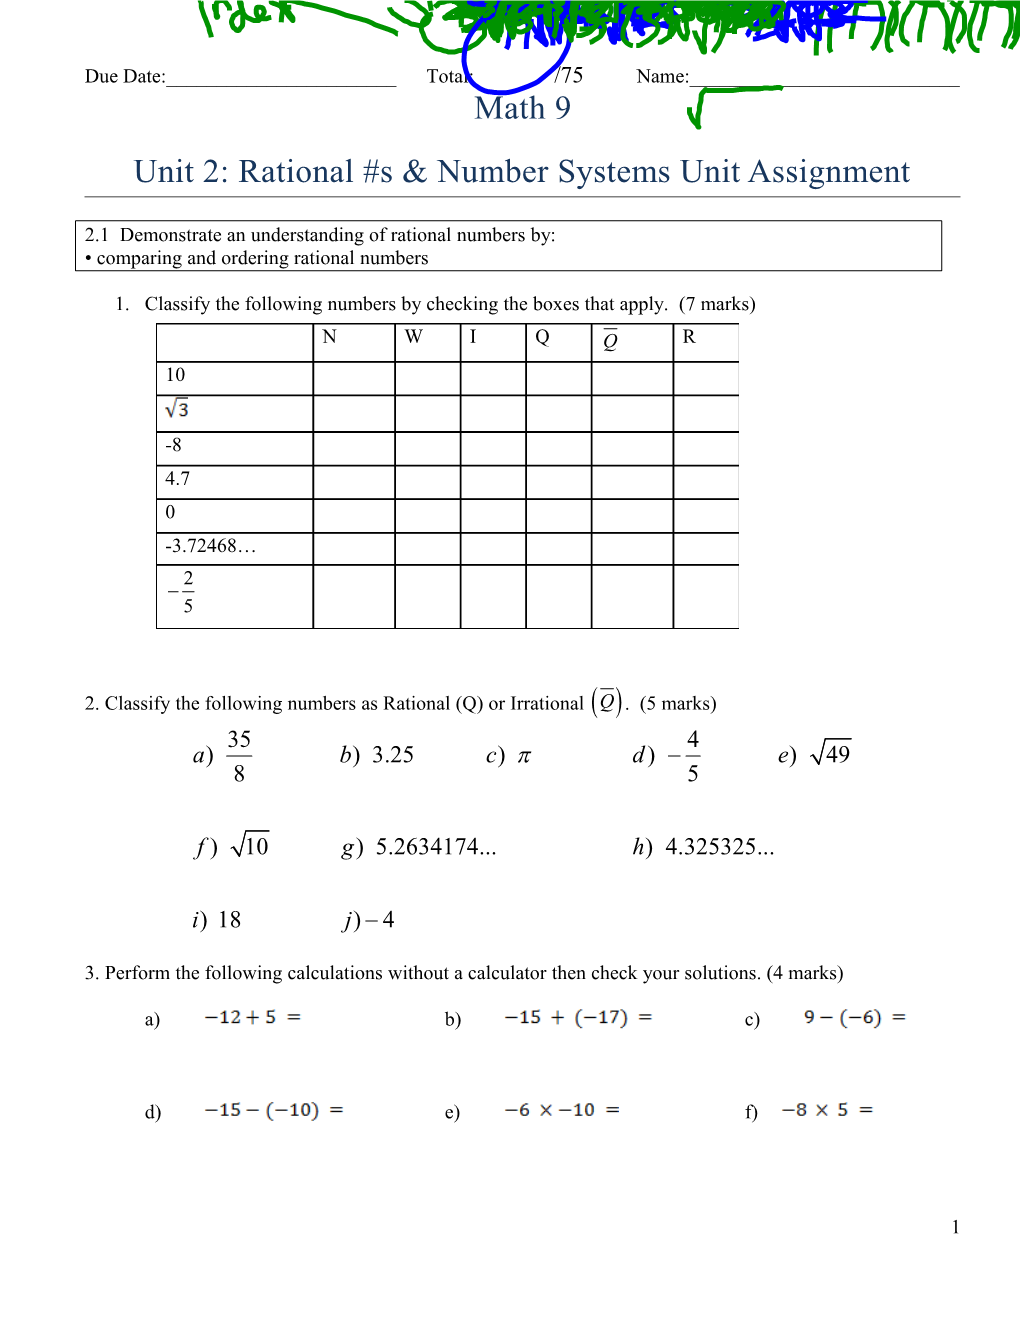 2.1 Demonstrate an Understanding of Rational Numbers By